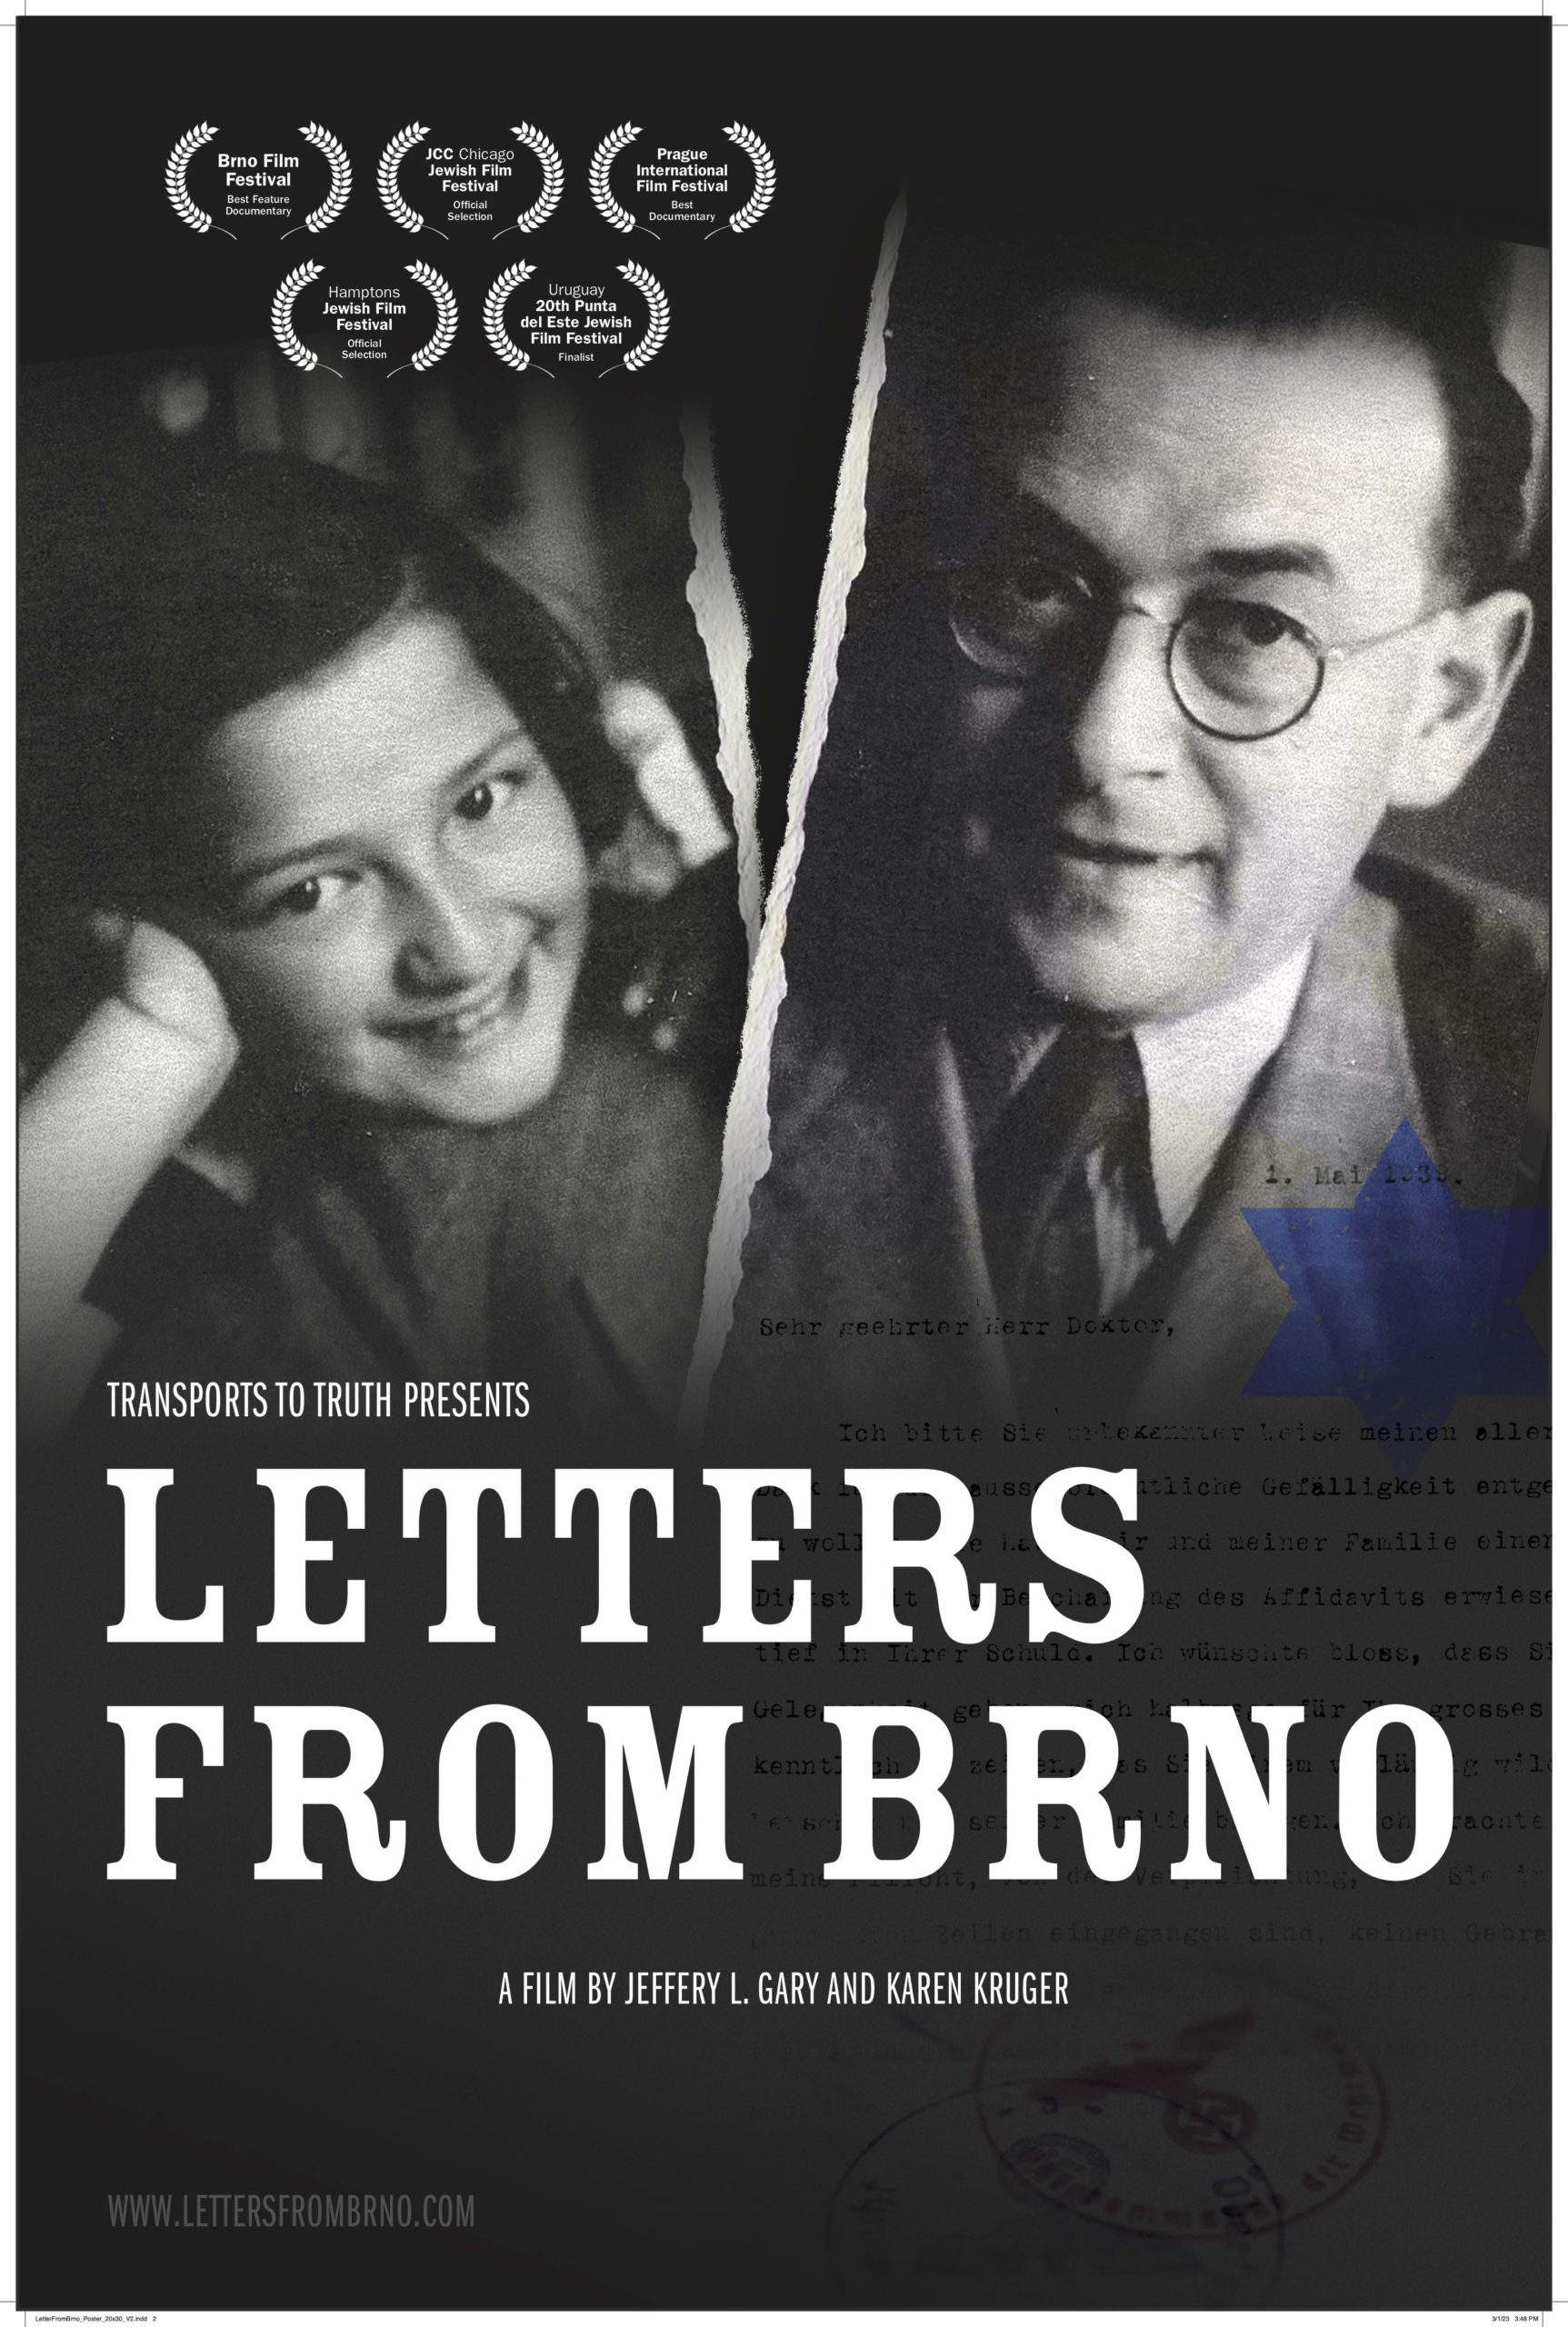 Screening of Letters From Brno and Discussion with Producer and Writer Karen Kruger